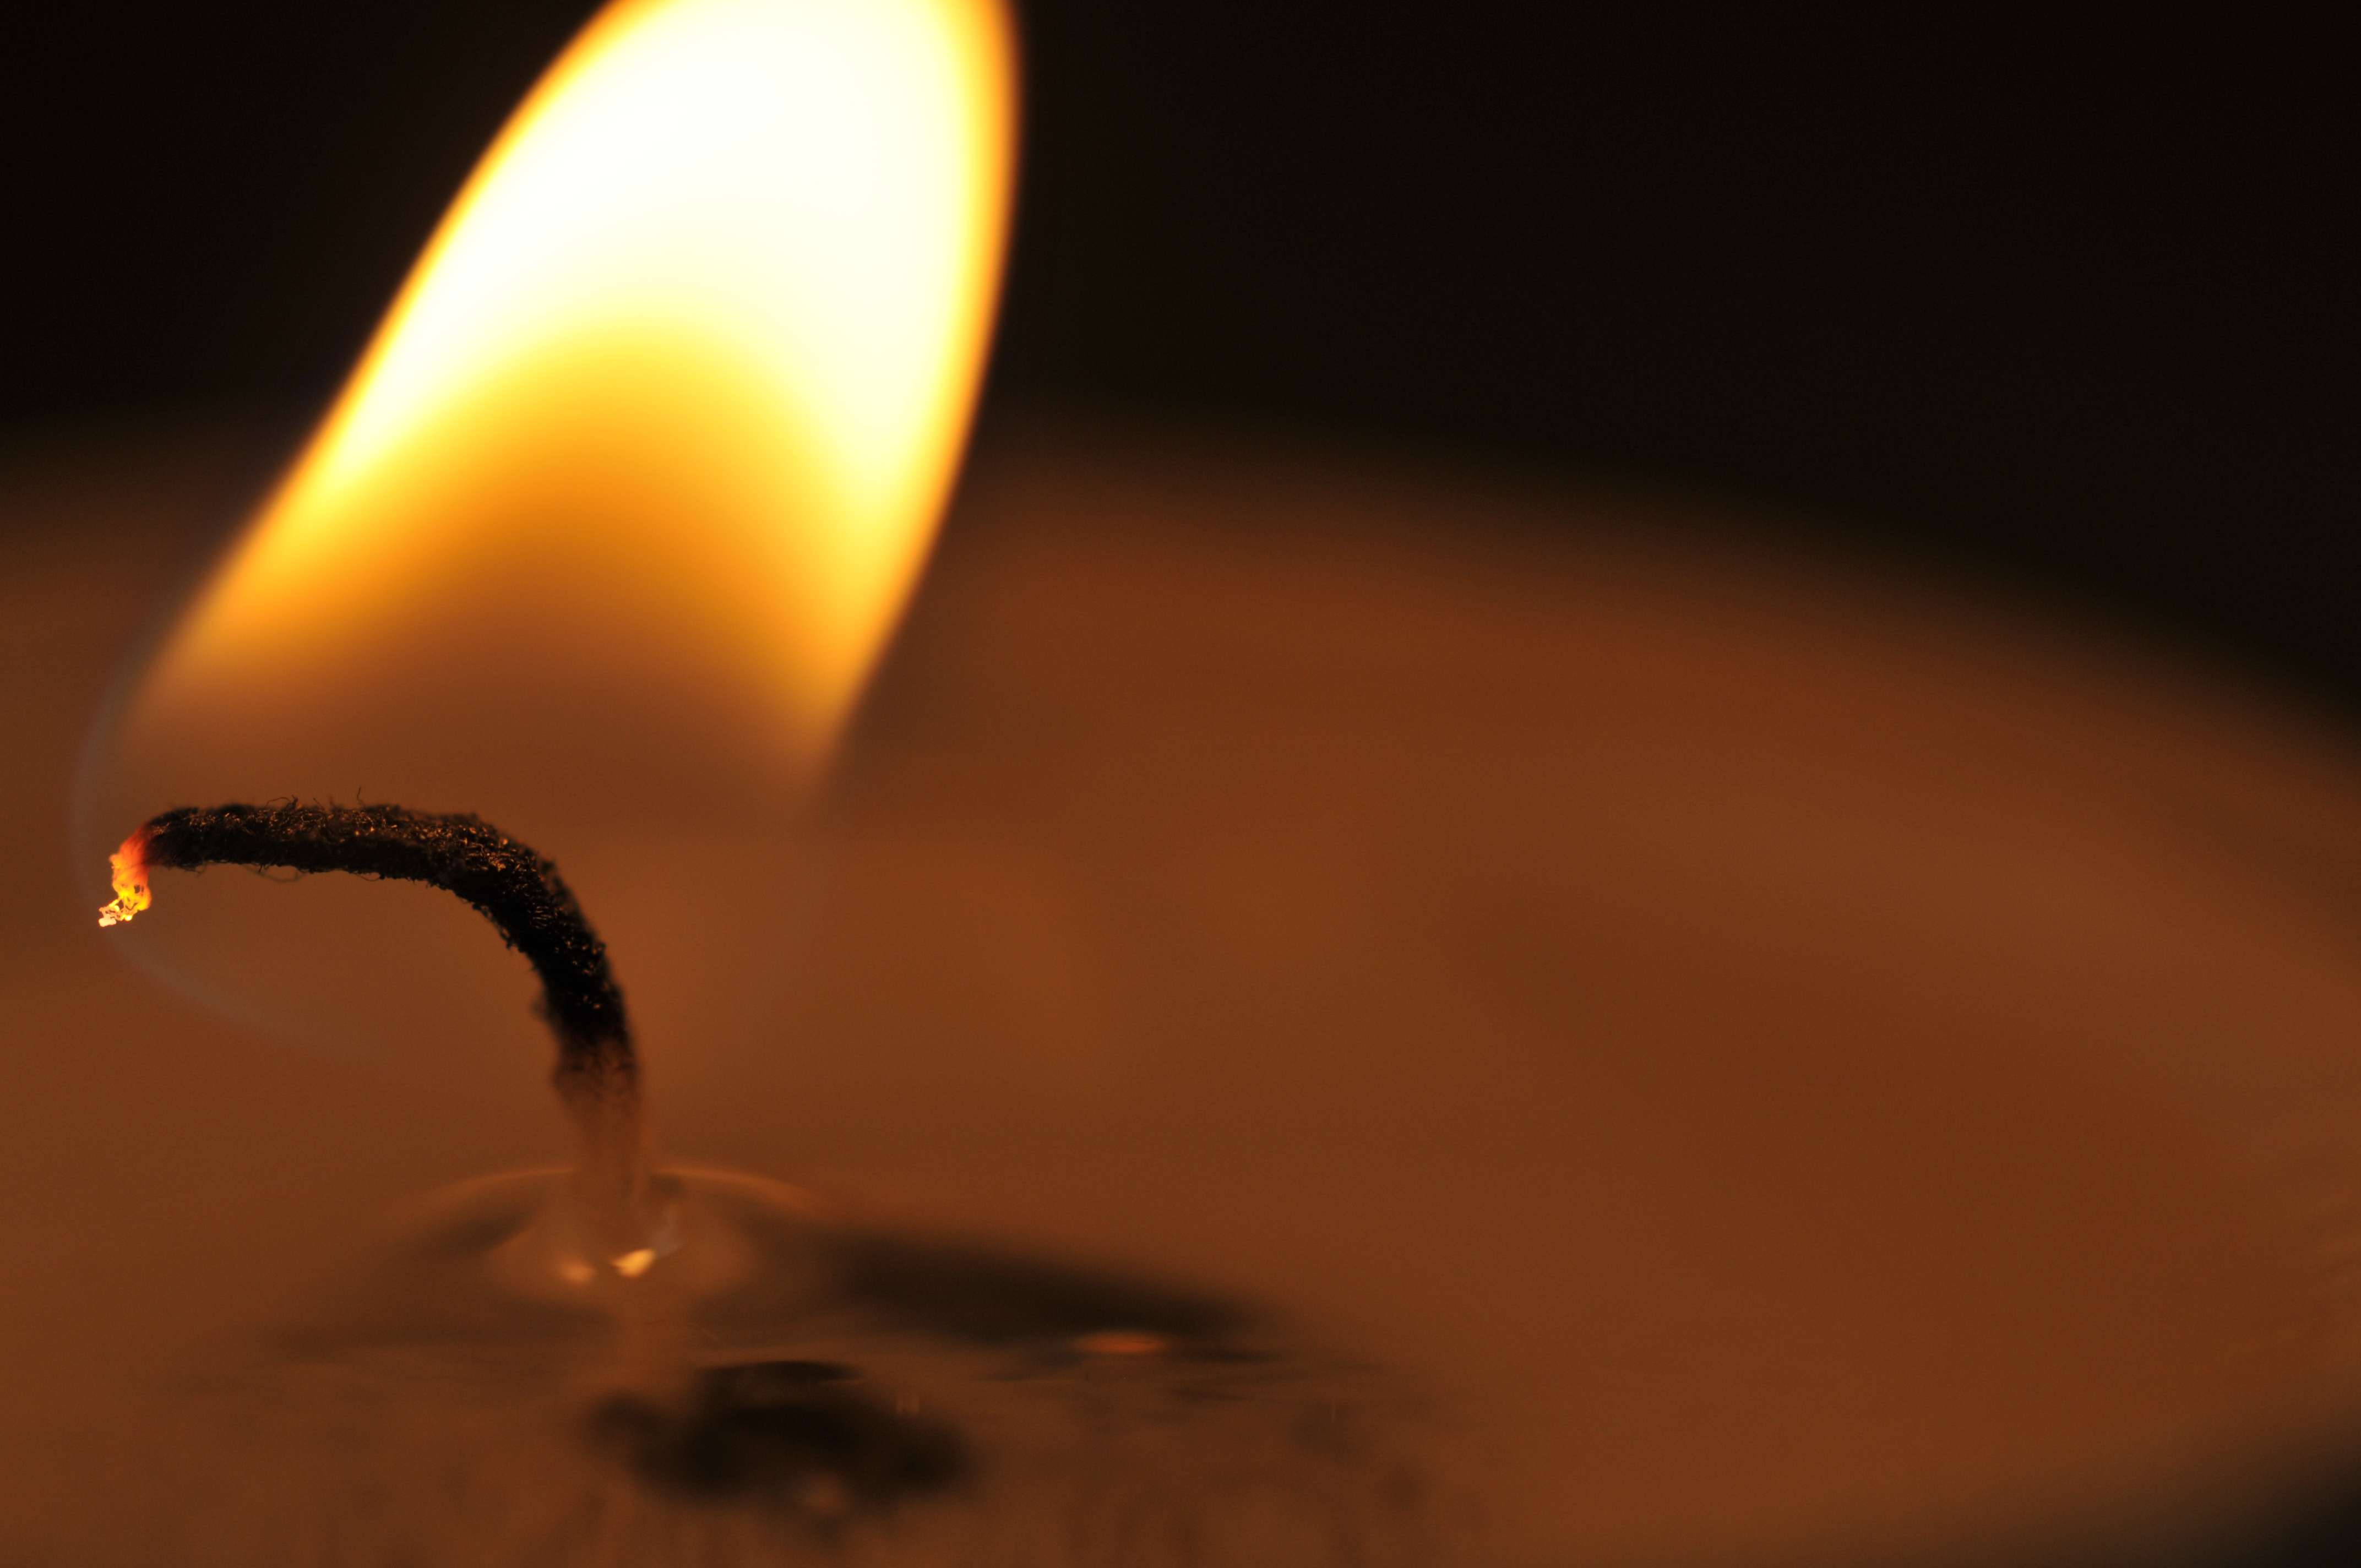 candle flame close up | G92.org